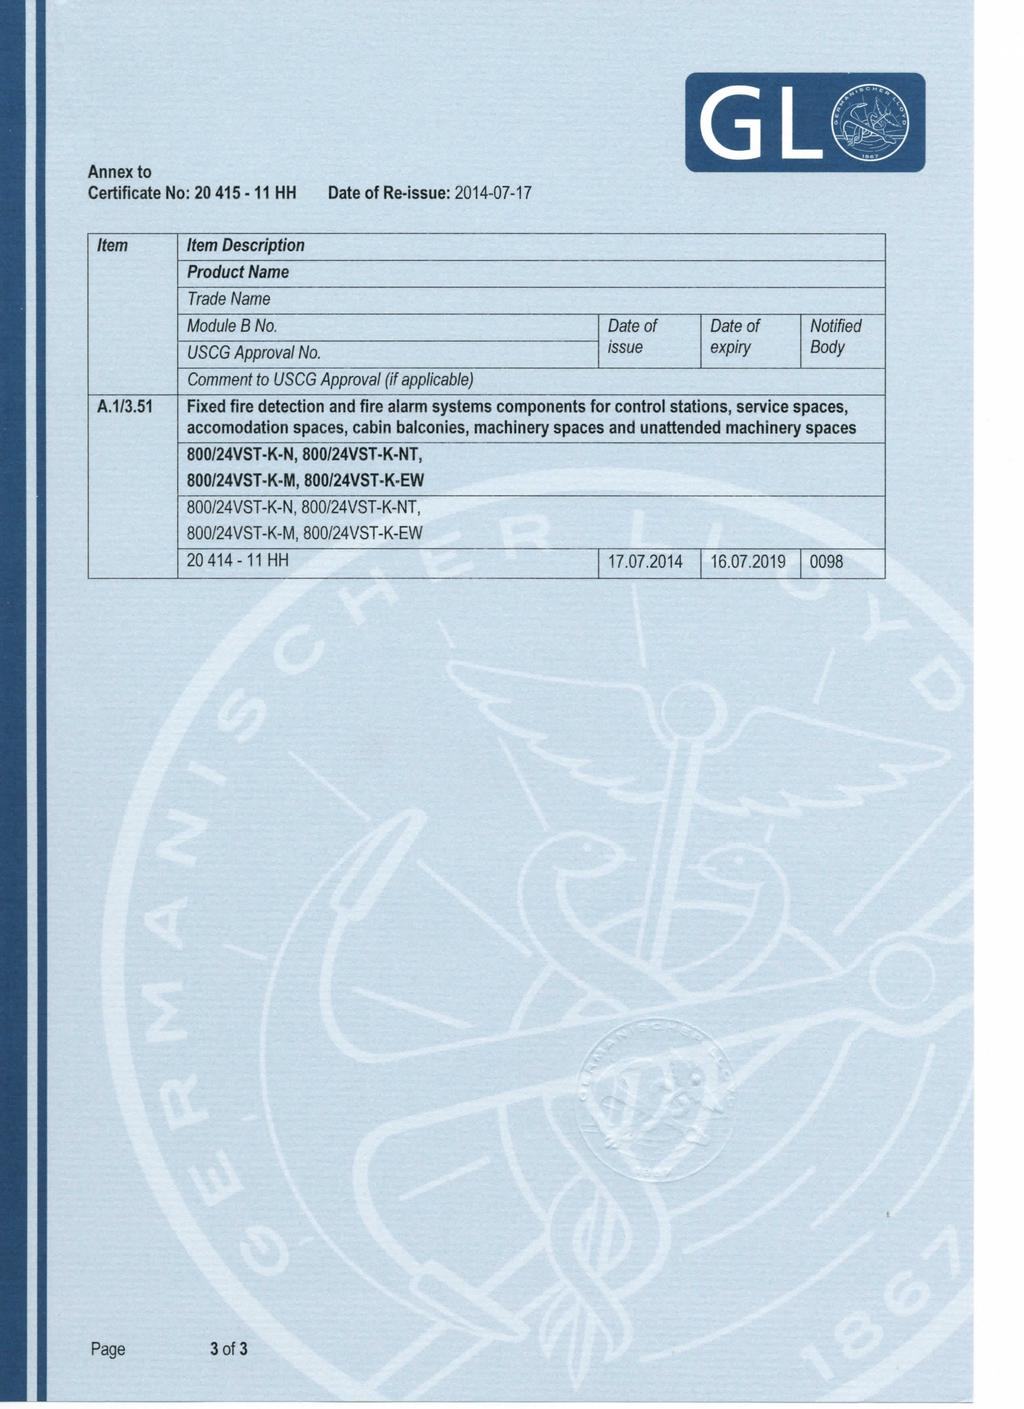 Annex to CertificateNo:20415-11HH Date of Re-issue: 2014-07-17 Item A.1/3.51 Item Description Product Name Trade Name Module B No. Date ctf Date of Notified USCG Approval No.